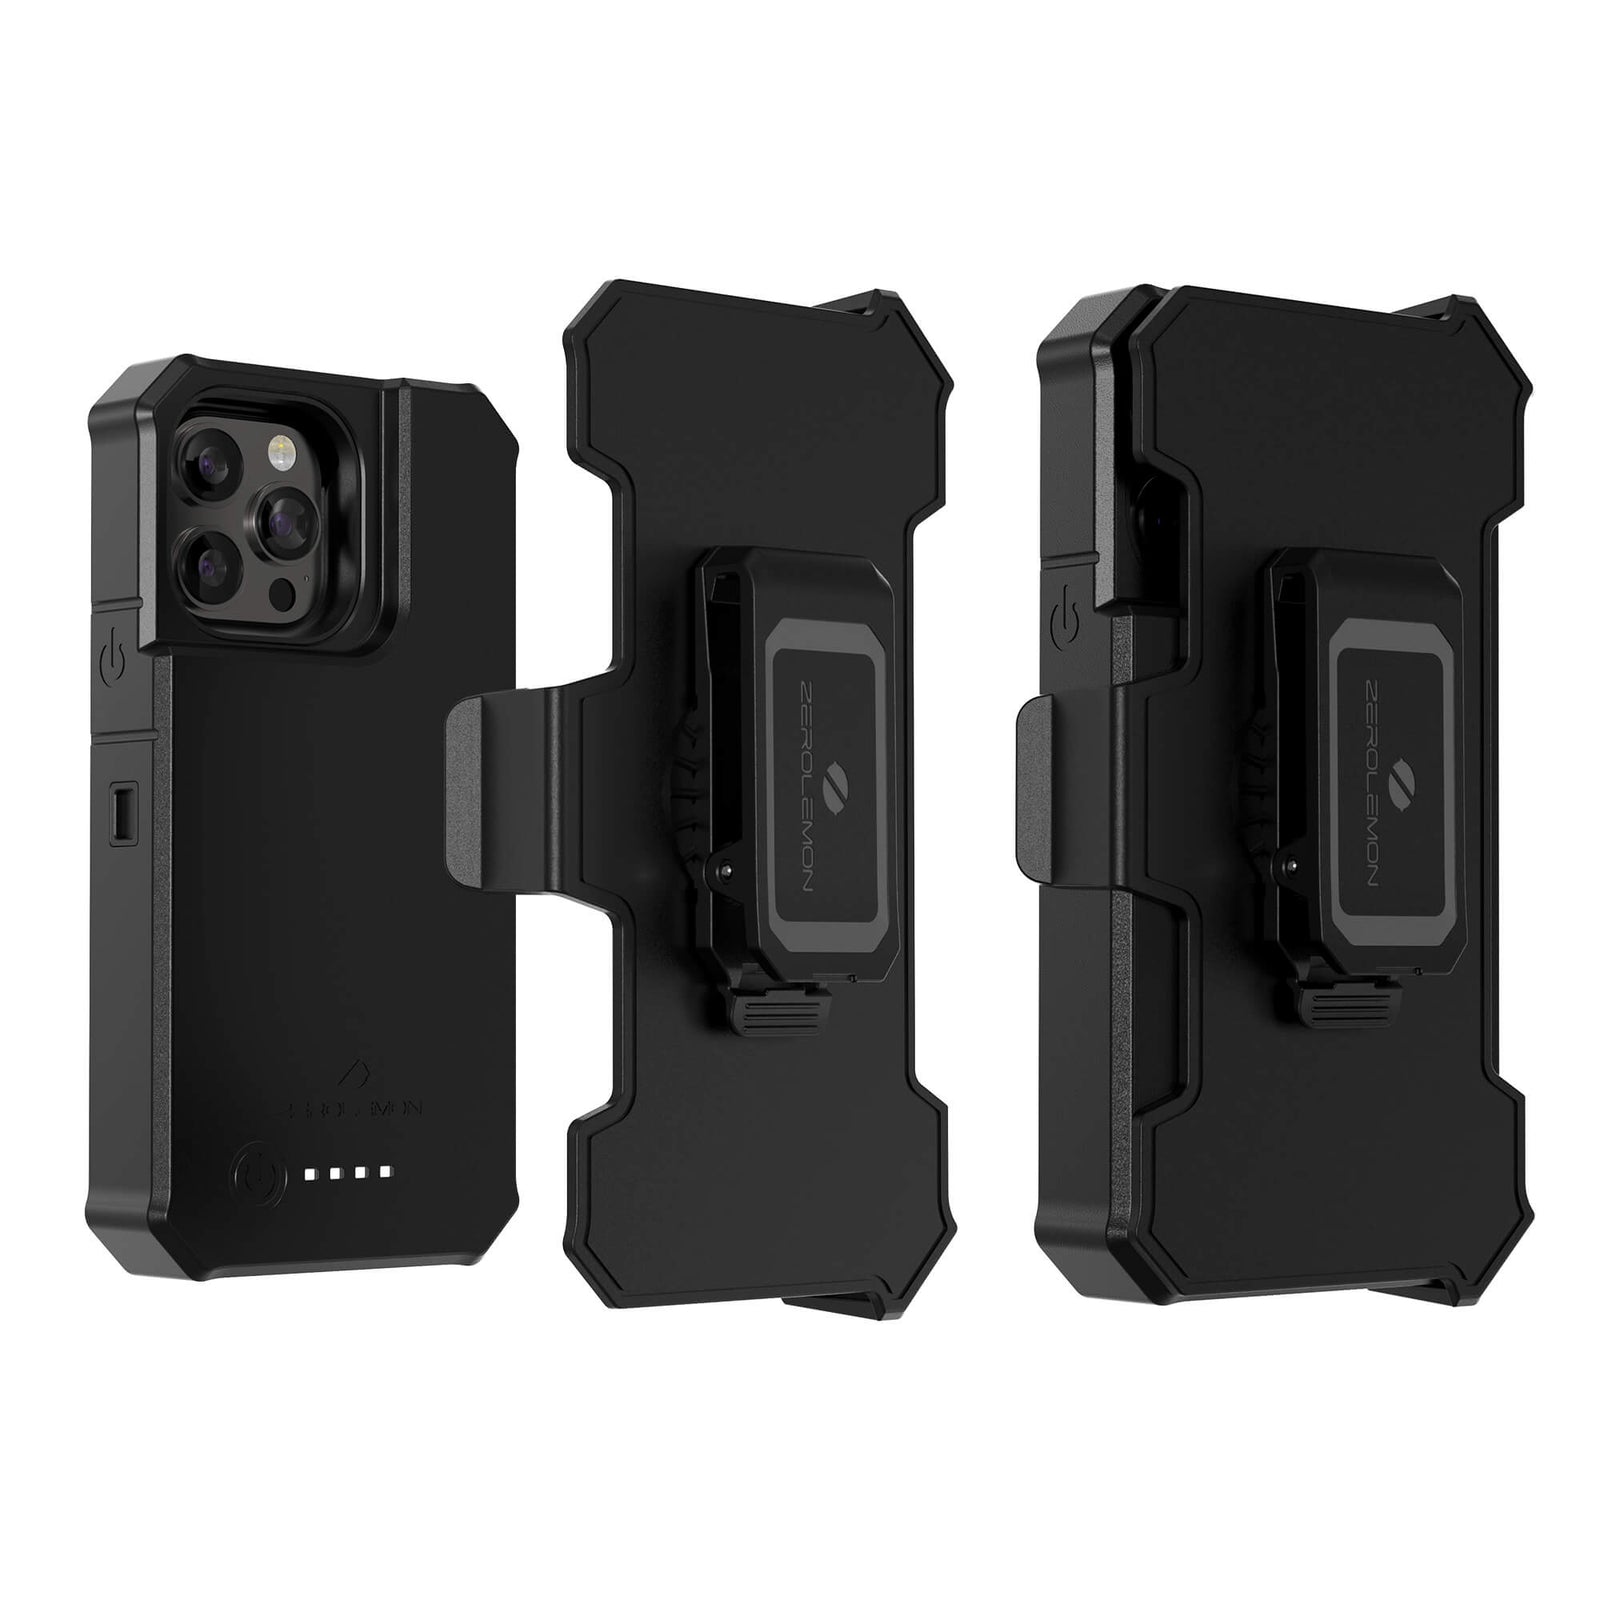 Belt Clip Holster for ZeroLemon iPhone 14 Pro Max 10000mAh Battery Case  [Shipping to US Only]